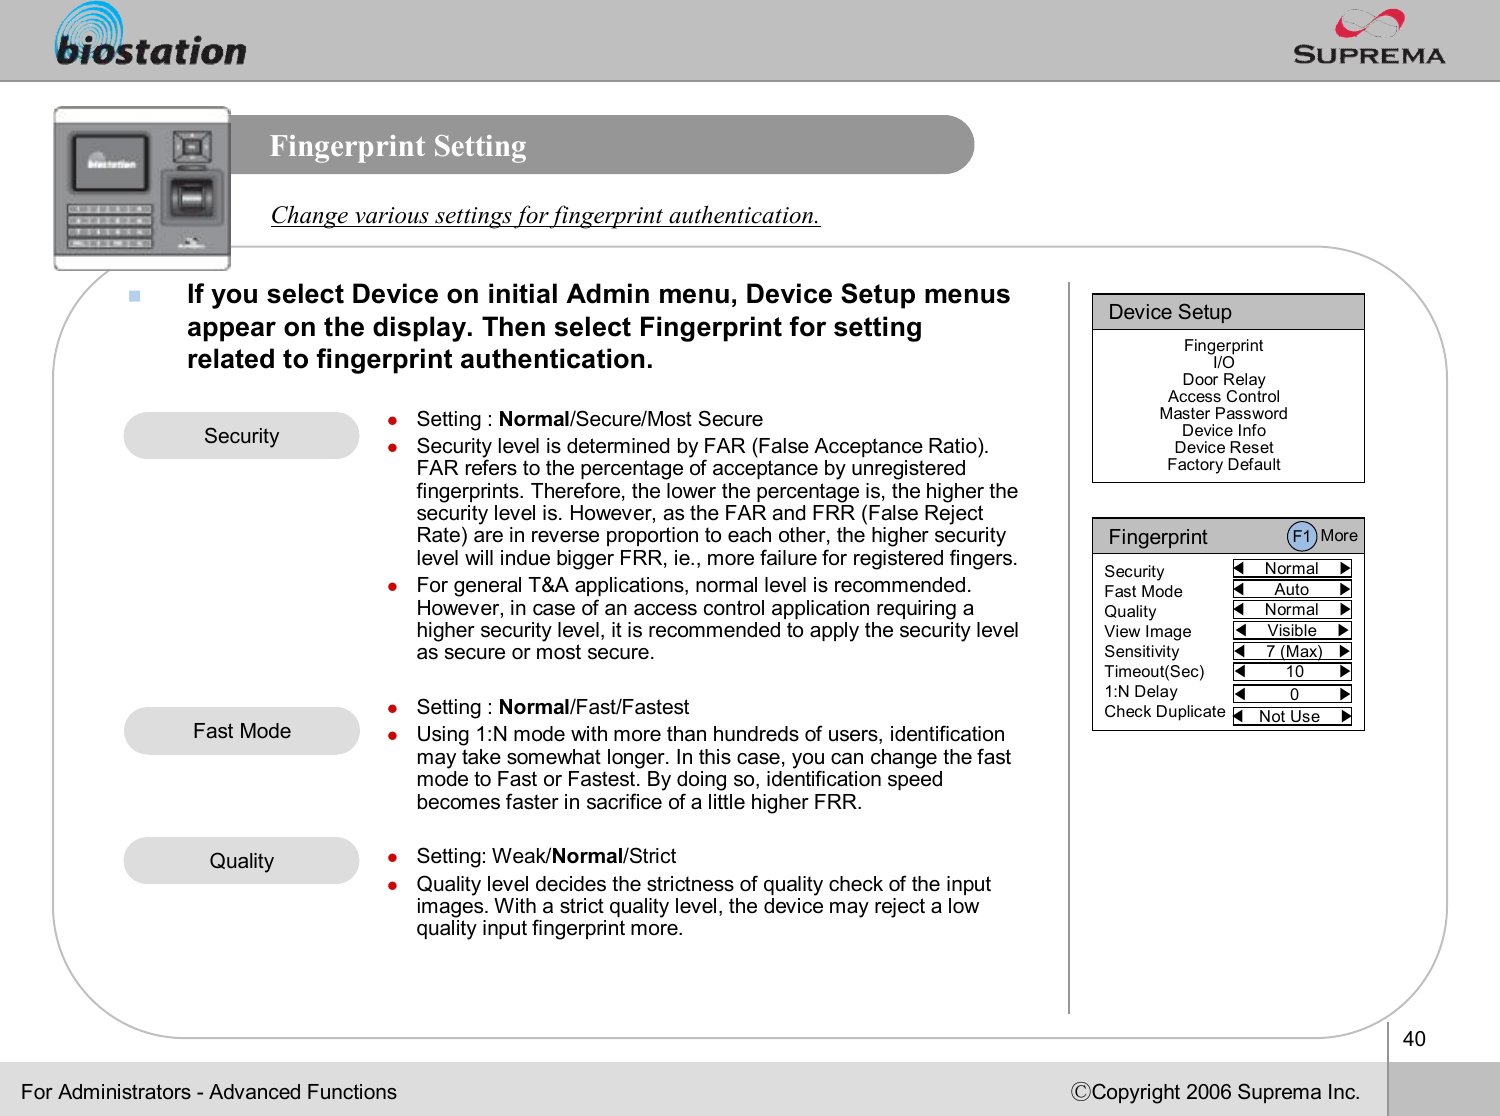 40ⒸCopyright 2006 Suprema Inc.Fingerprint SettingnIf you select Device on initial Admin menu, Device Setup menus appear on the display. Then select Fingerprint for setting related to fingerprint authentication.Change various settings for fingerprint authentication.lSetting : Normal/Secure/Most SecurelSecurity level is determined by FAR (False Acceptance Ratio). FAR refers to the percentage of acceptance by unregistered fingerprints. Therefore, the lower the percentage is, the higherthe security level is. However, as the FAR and FRR (False Reject Rate) are in reverse proportion to each other, the higher security level will indue bigger FRR, ie., more failure for registered fingers. lFor general T&amp;A applications, normal level is recommended. However, in case of an access control application requiring a higher security level, it is recommended to apply the security level as secure or most secure. lSetting : Normal/Fast/FastestlUsing 1:N mode with more than hundreds of users, identification may take somewhat longer. In this case, you can change the fast mode to Fast or Fastest. By doing so, identification speed becomes faster in sacrifice of a little higher FRR. lSetting: Weak/Normal/StrictlQuality level decides the strictness of quality check of the input images. With a strict quality level, the device may reject a lowquality input fingerprint more.SecurityDevice SetupFingerprintI/ODoor RelayAccess ControlMaster PasswordDevice InfoDevice ResetFactory DefaultFor Administrators -Advanced FunctionsFingerprint◀Normal    ▶SecurityFast ModeQualityView ImageSensitivityTimeout(Sec)1:N DelayCheck Duplicate◀Auto      ▶◀Normal    ▶◀Visible    ▶◀7 (Max)   ▶◀10       ▶◀Not Use    ▶◀0        ▶F1 MoreFast ModeQuality